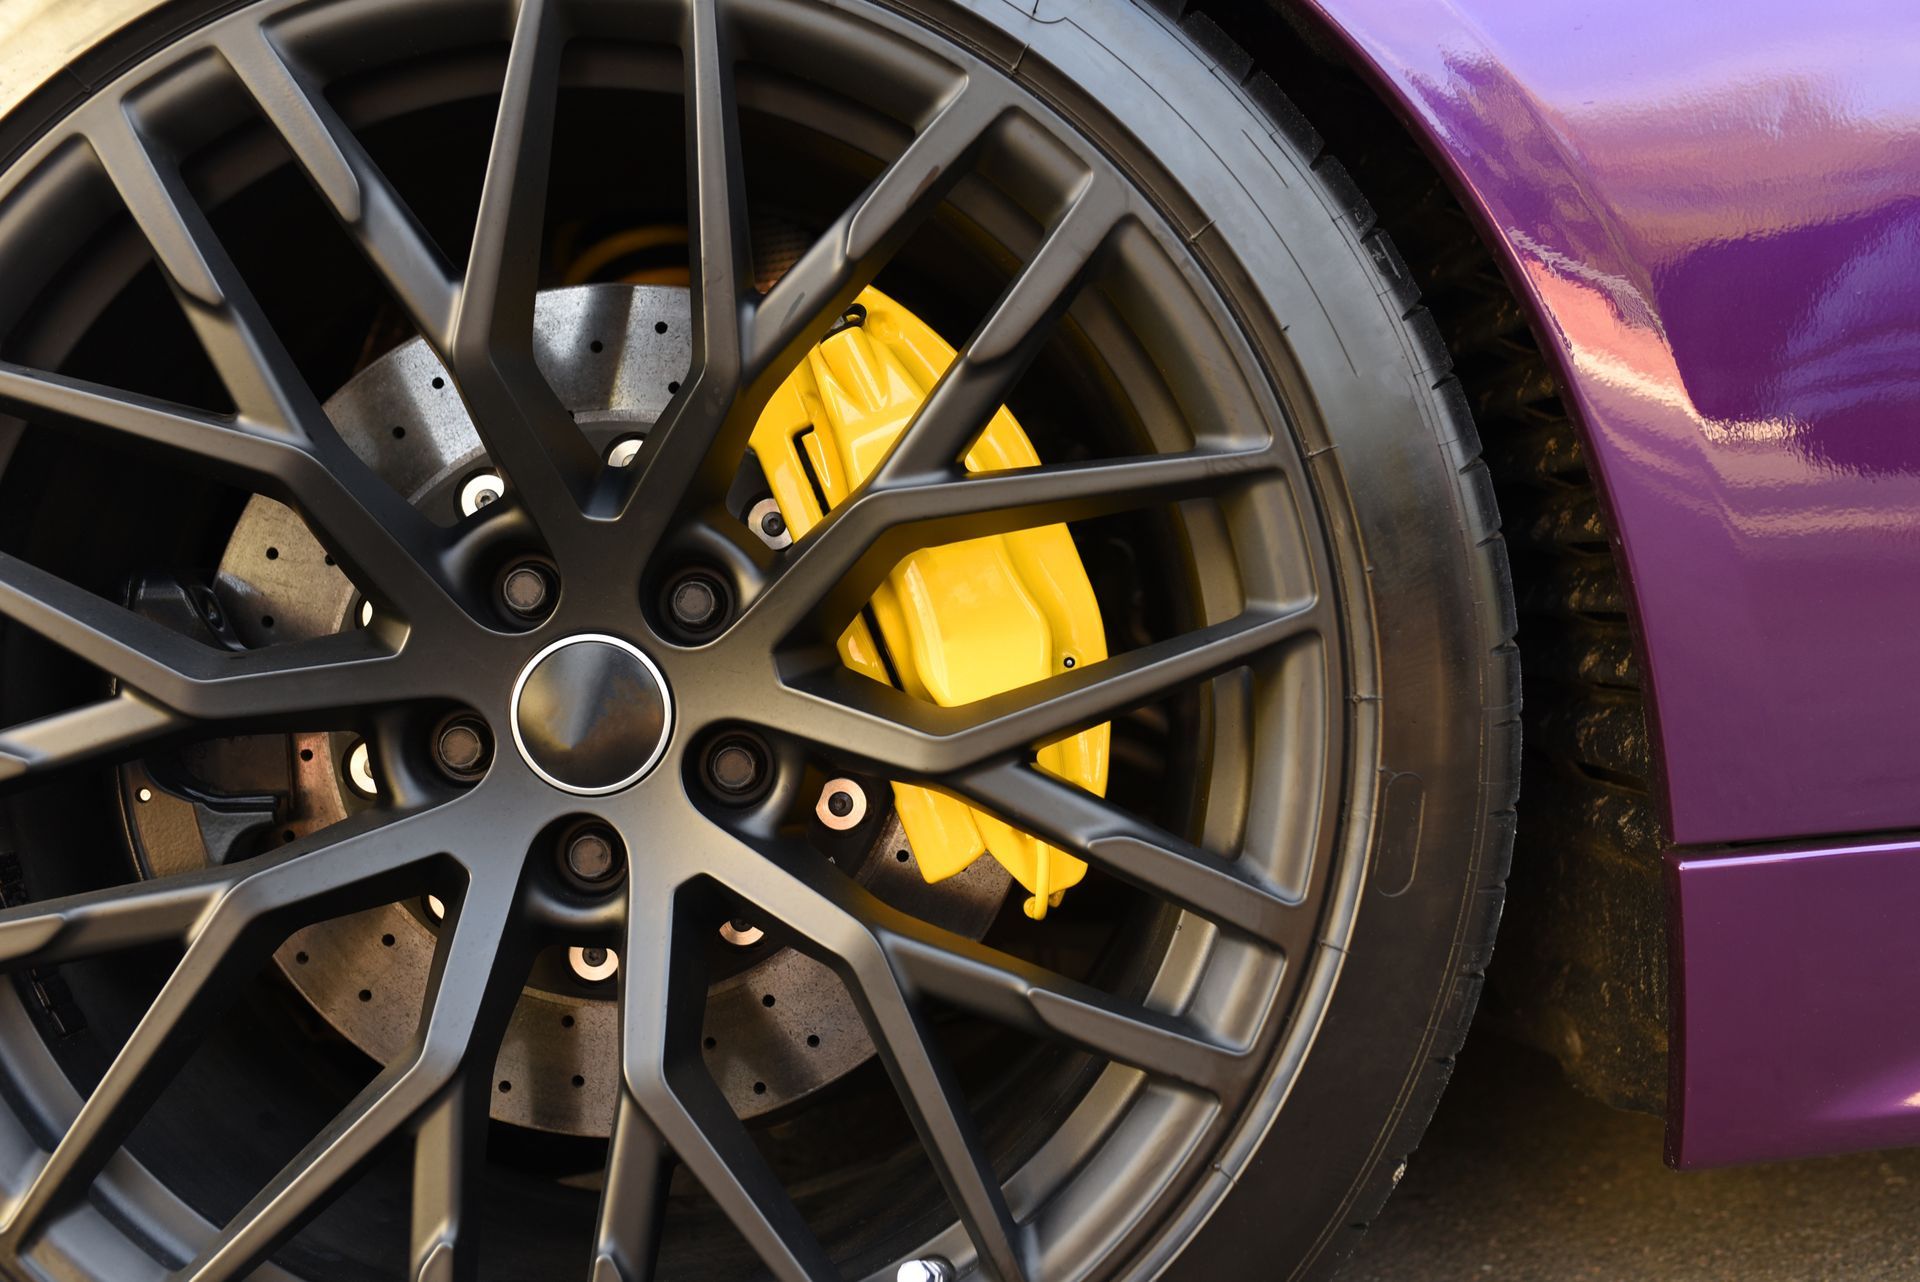 Custom Wheels at ﻿Future Tire and Automotive﻿ in ﻿Holbrook, Lakeside, Pinetop, and Show Low, AZ﻿